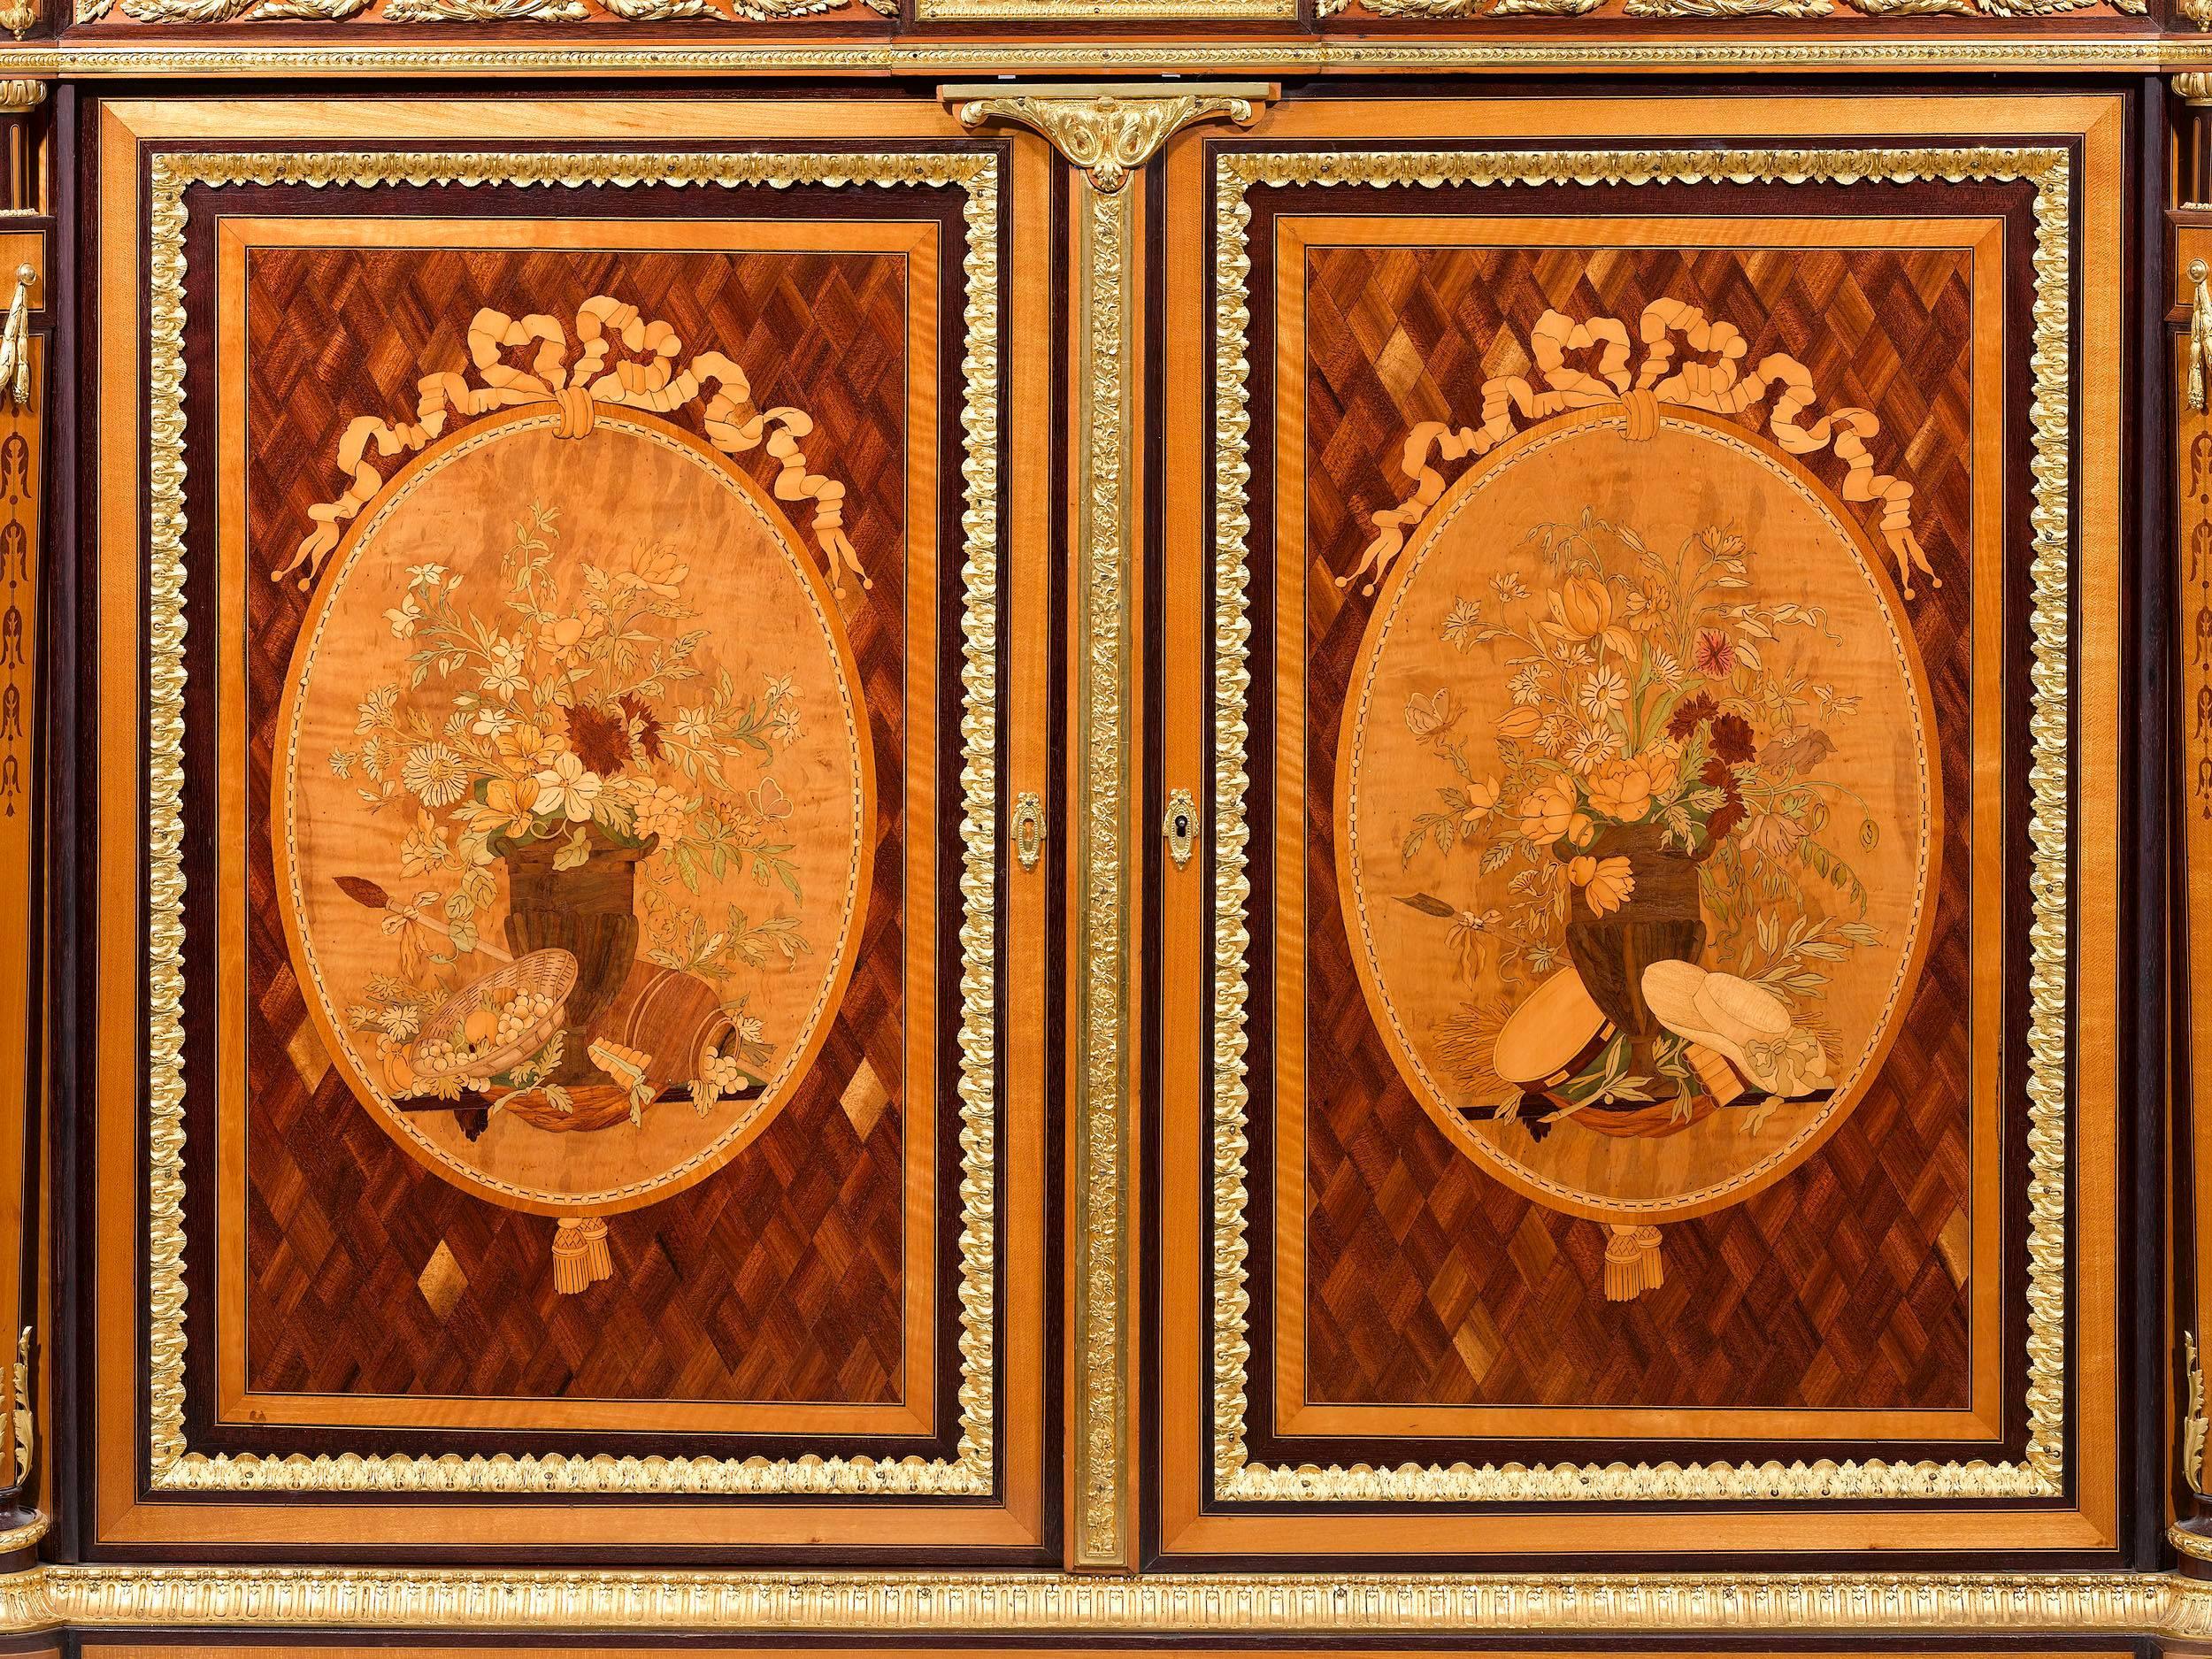 This pair of French inlaid cabinets displays an astonishing level of artistry and craftsmanship. Clearly the work of the most skilled artisans, the intricate doré bronze is almost certainly the work of legendary Parisian bronzier, Victor Paillard.